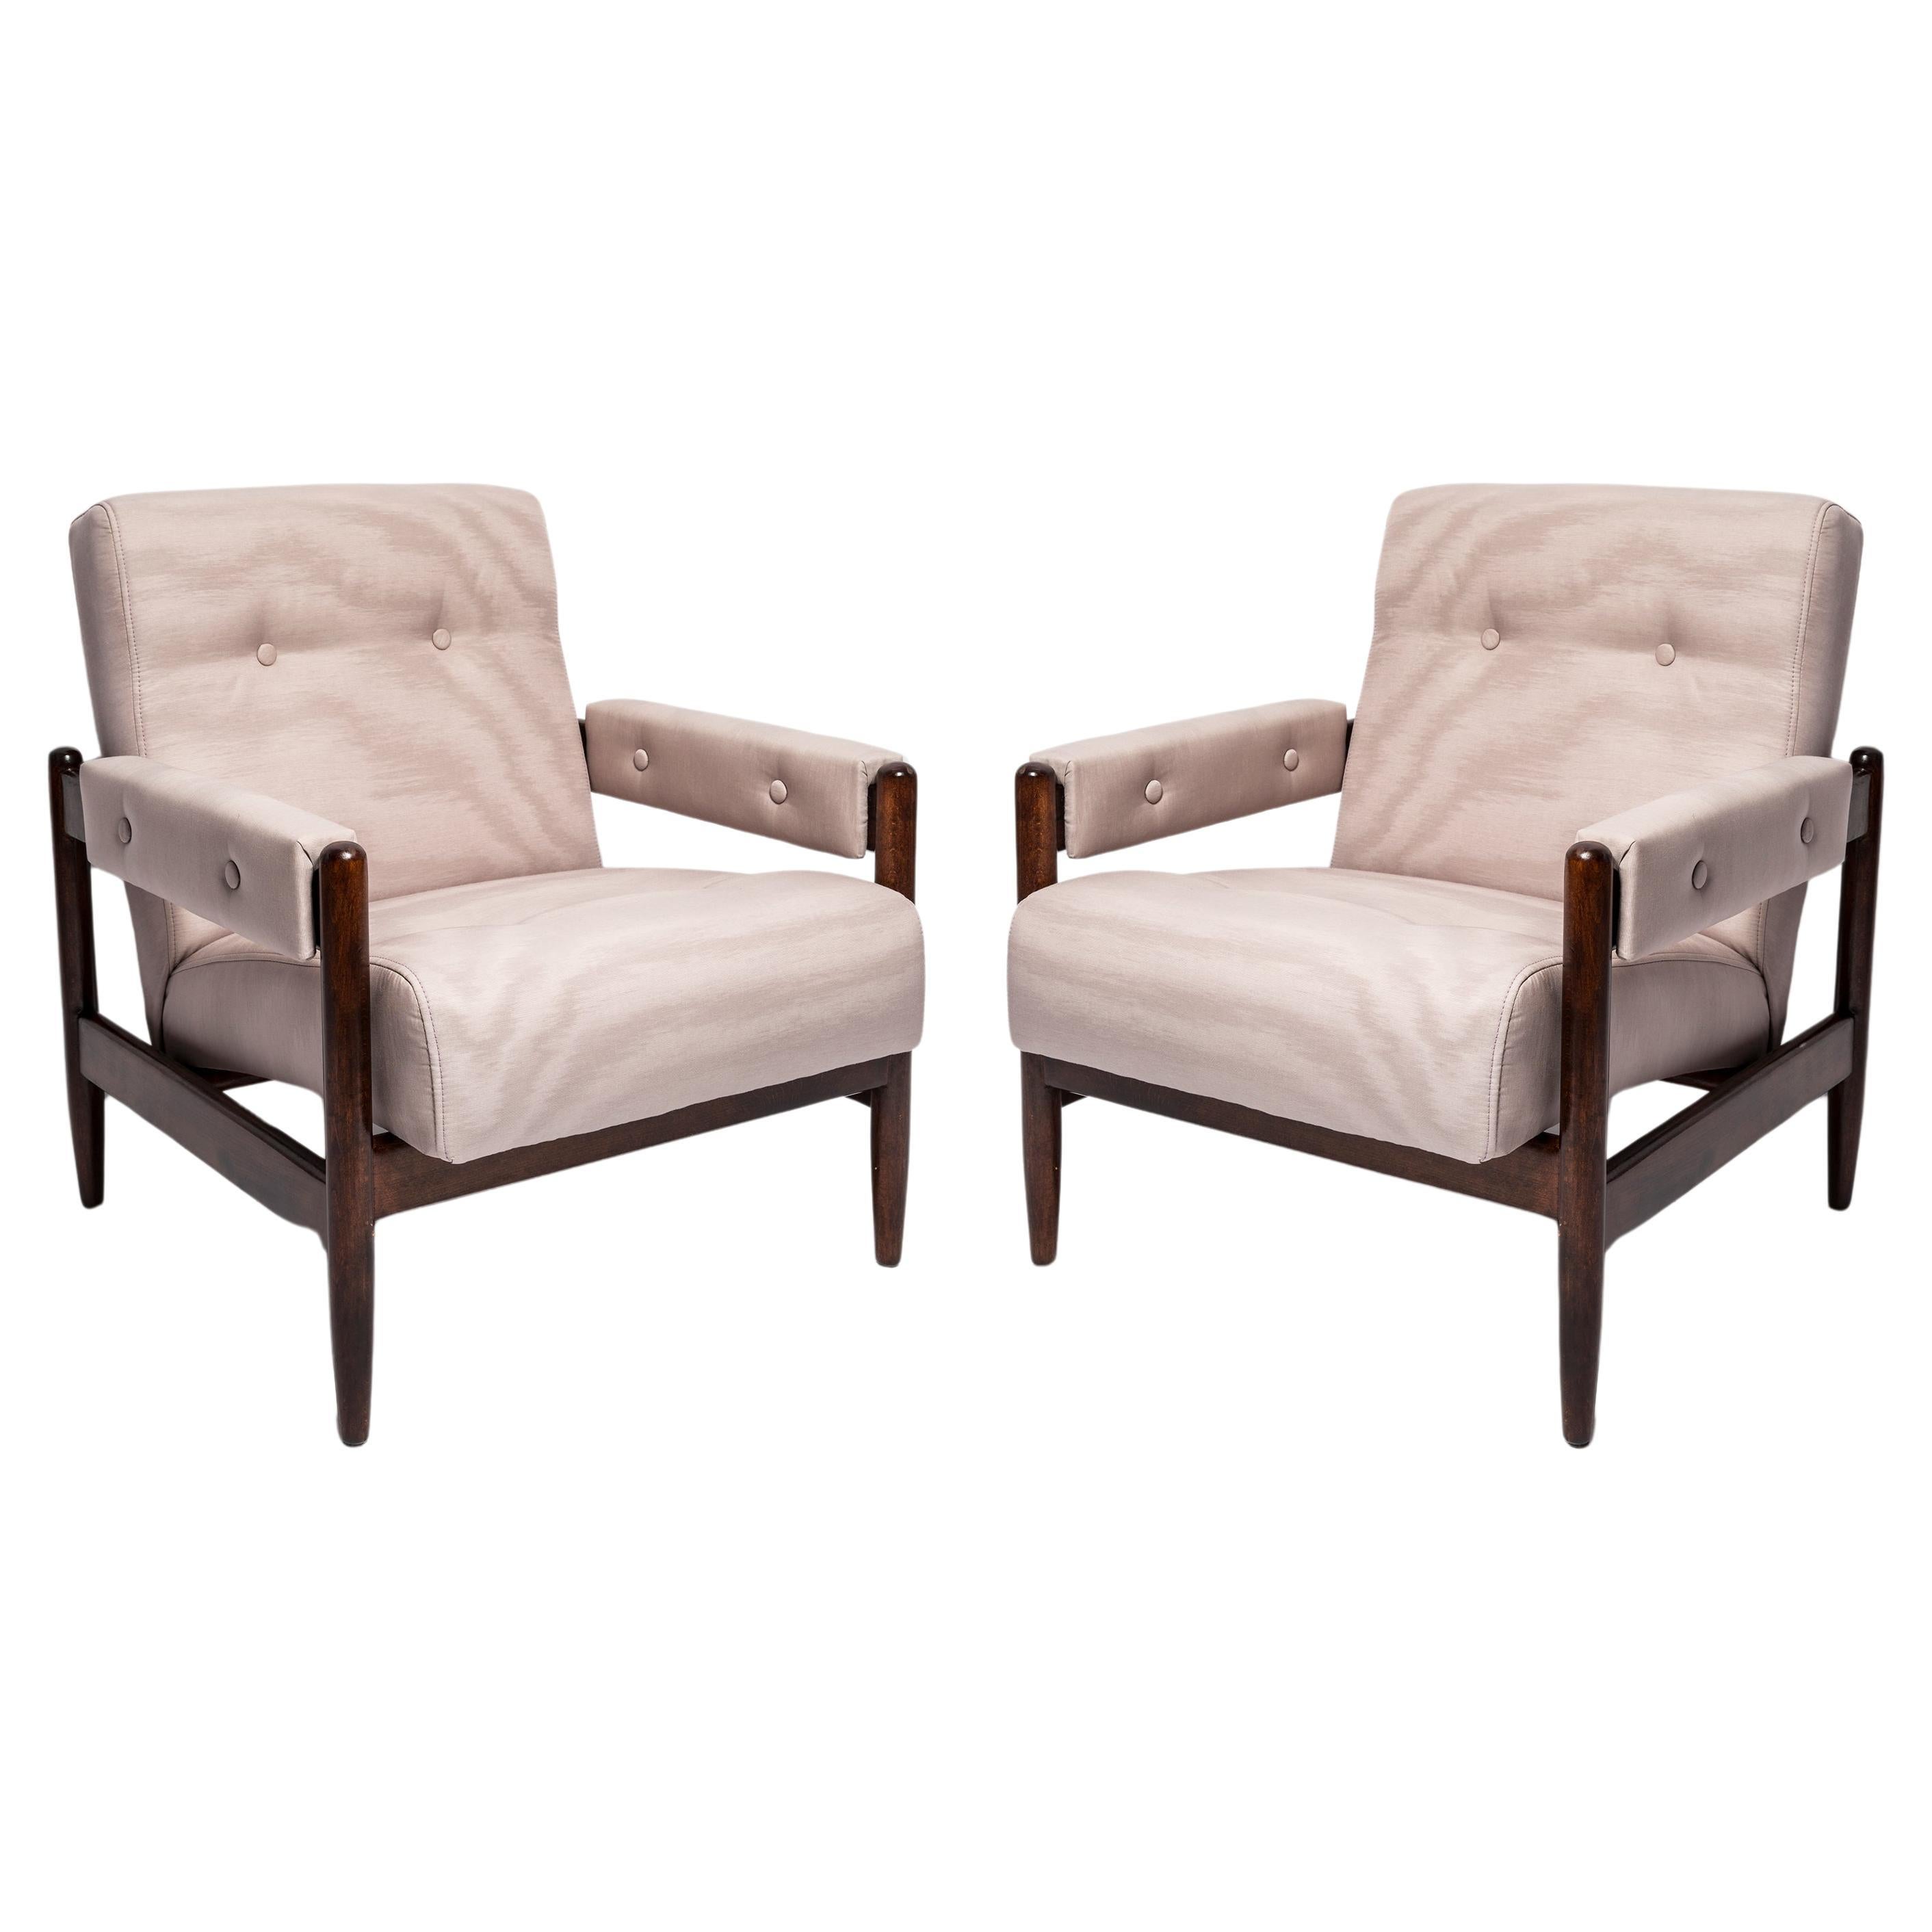 Pair of Mid Century Amoir Fou Moiré Purple Pink Armchairs, Europe, 1960s For Sale